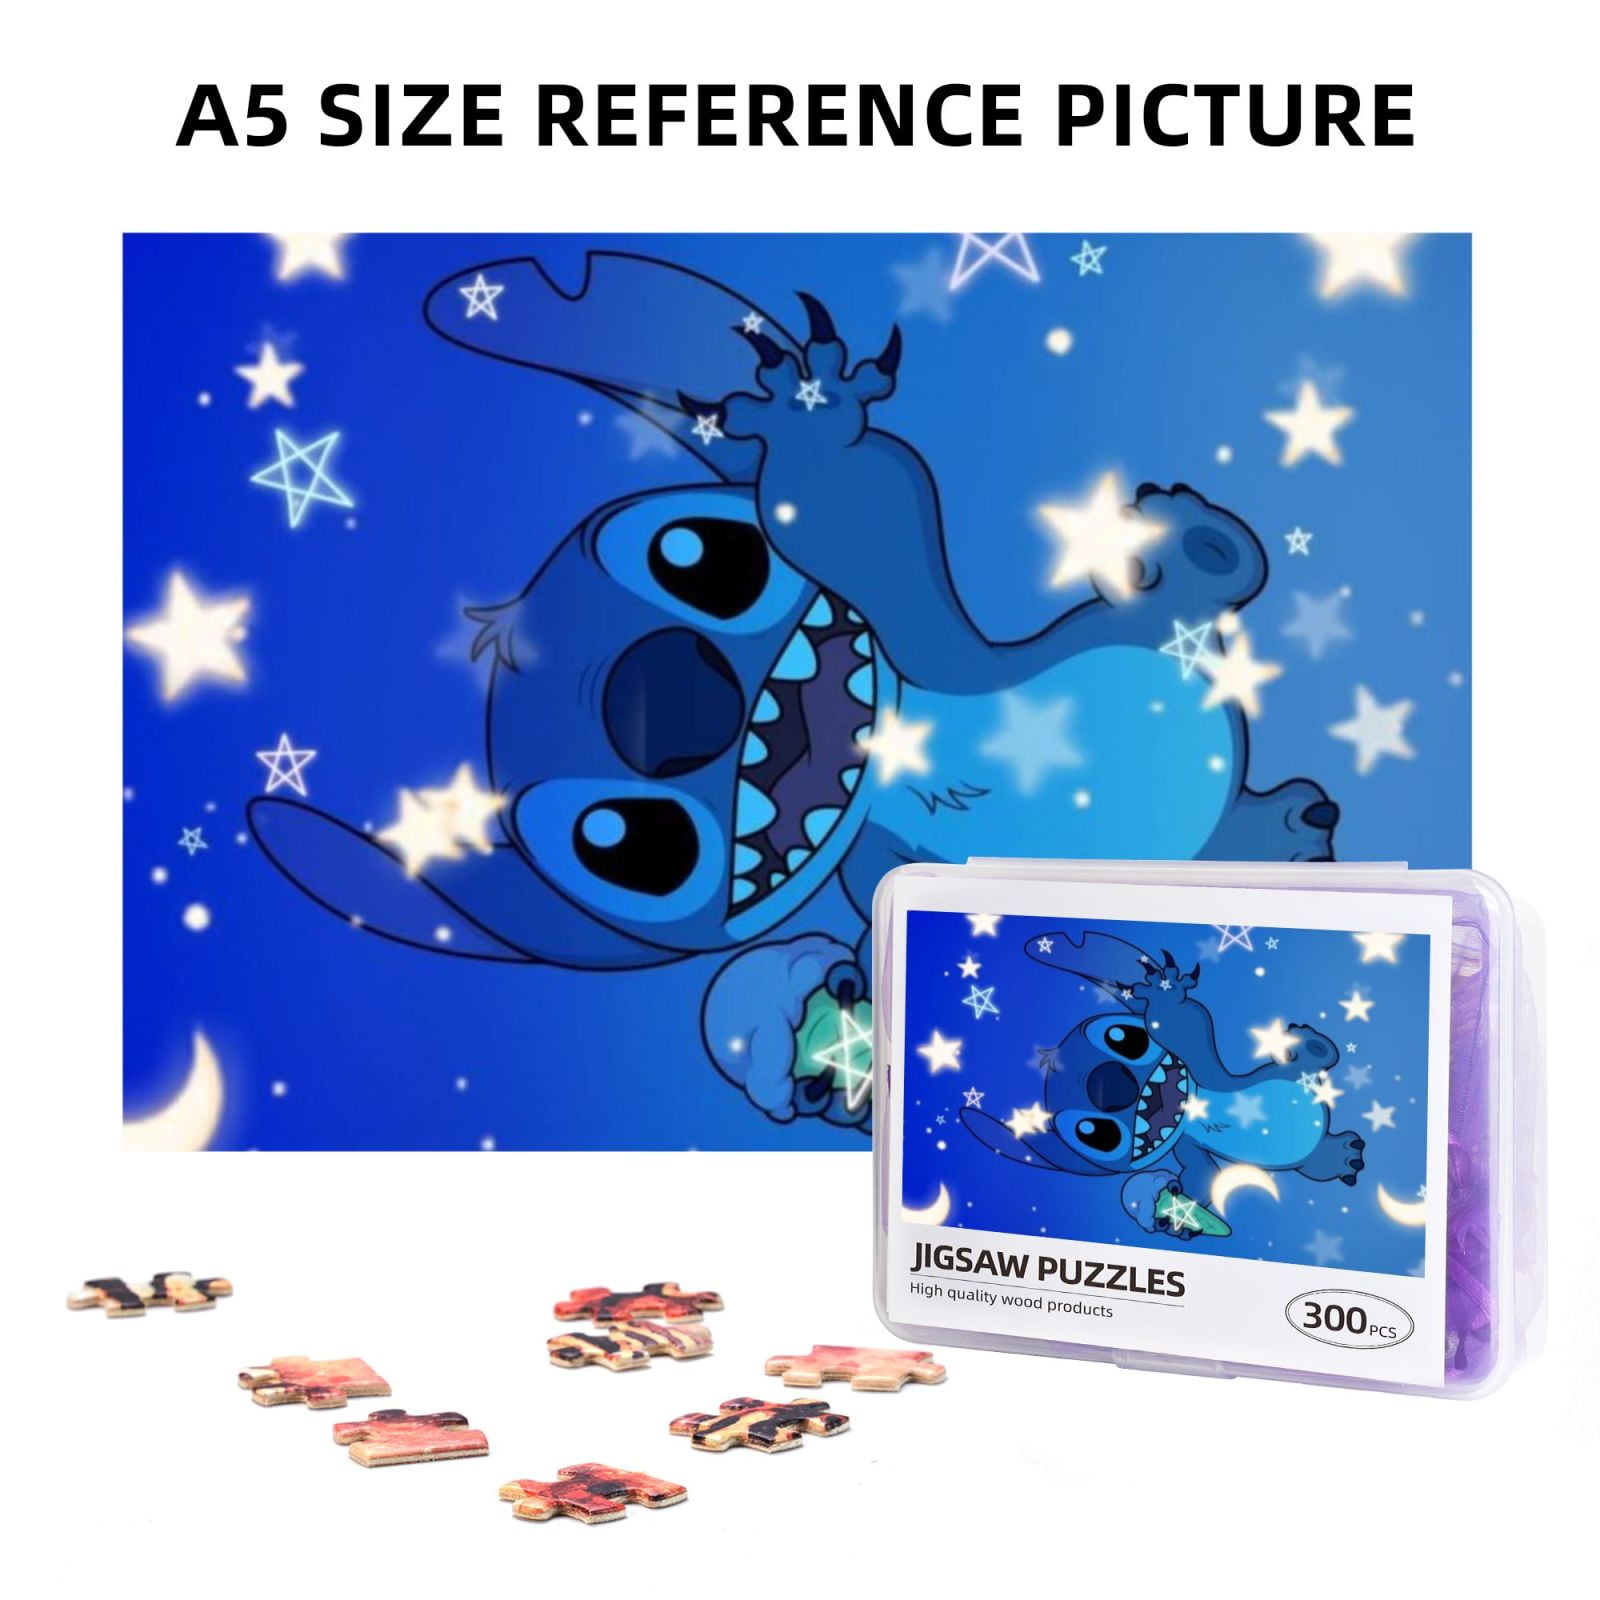 Solve Lilo & Stitch jigsaw puzzle online with 273 pieces